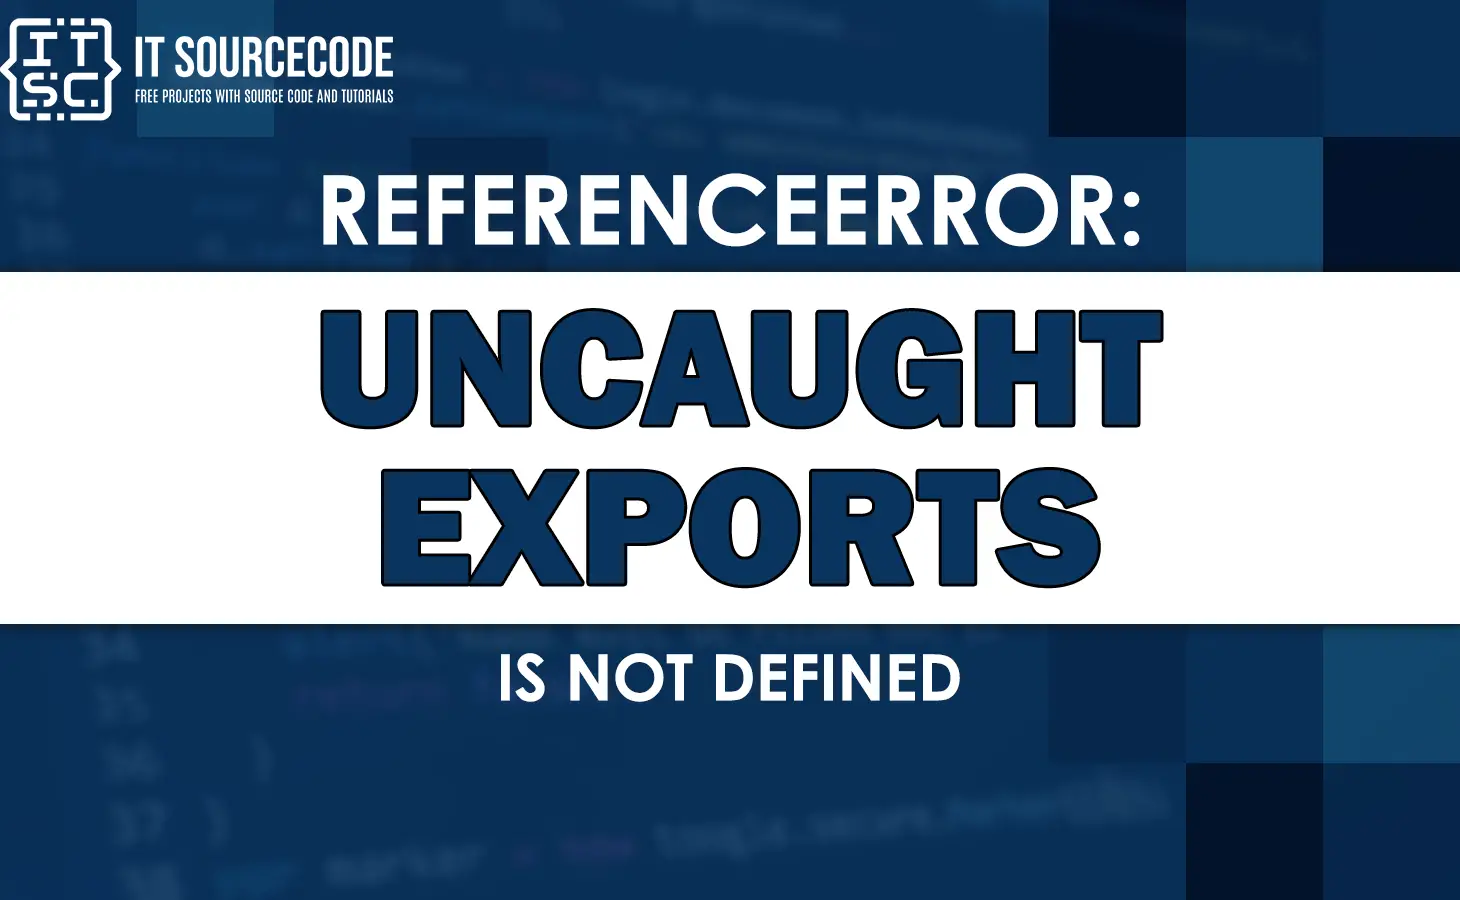 uncaught referenceerror exports is not defined